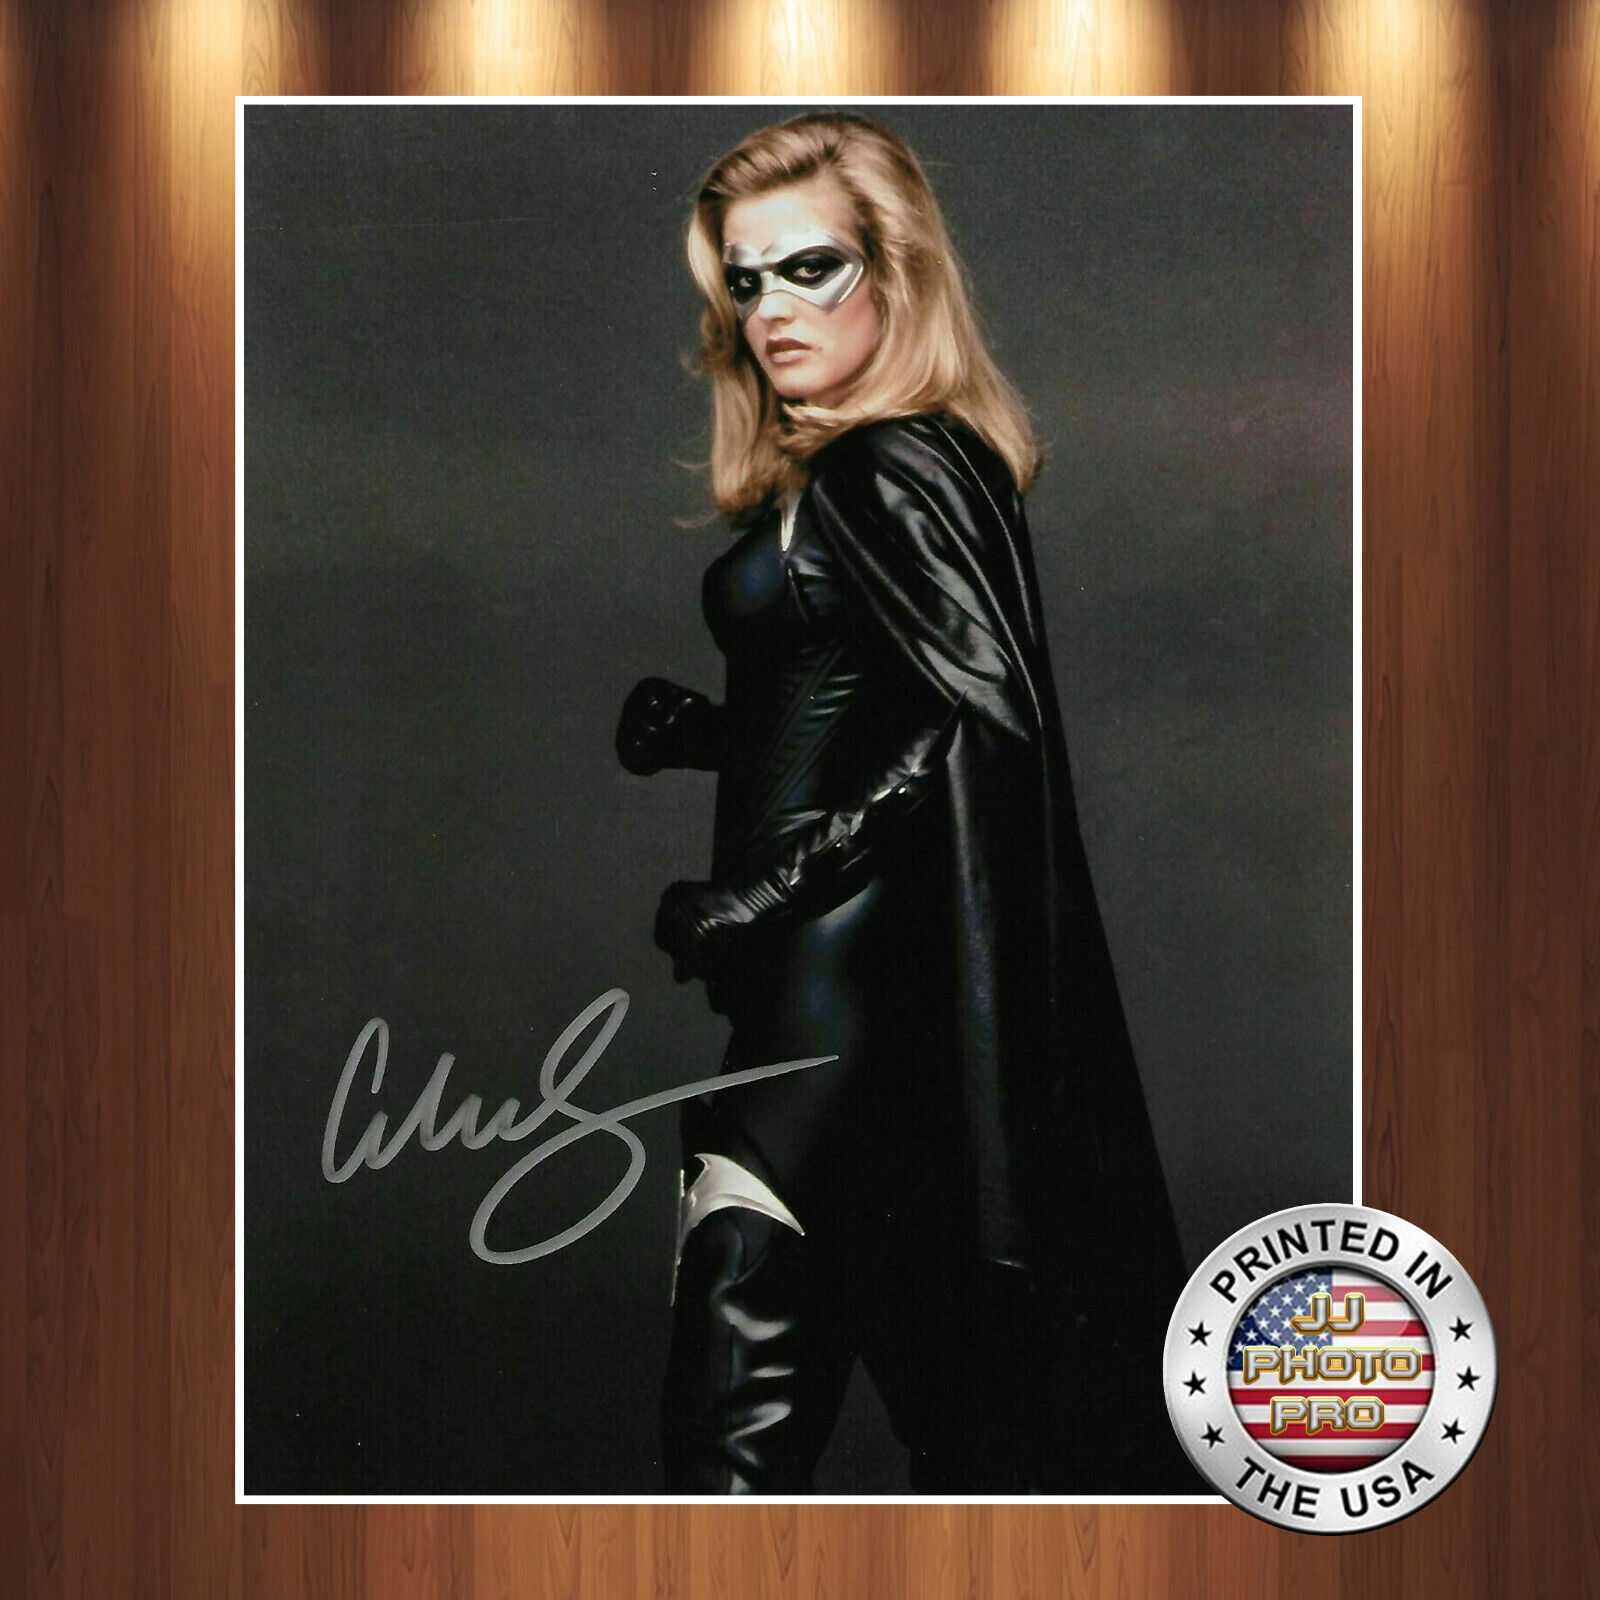 Alicia Silverstone Autographed Signed 8x10 Photo Poster painting (Batman) REPRINT